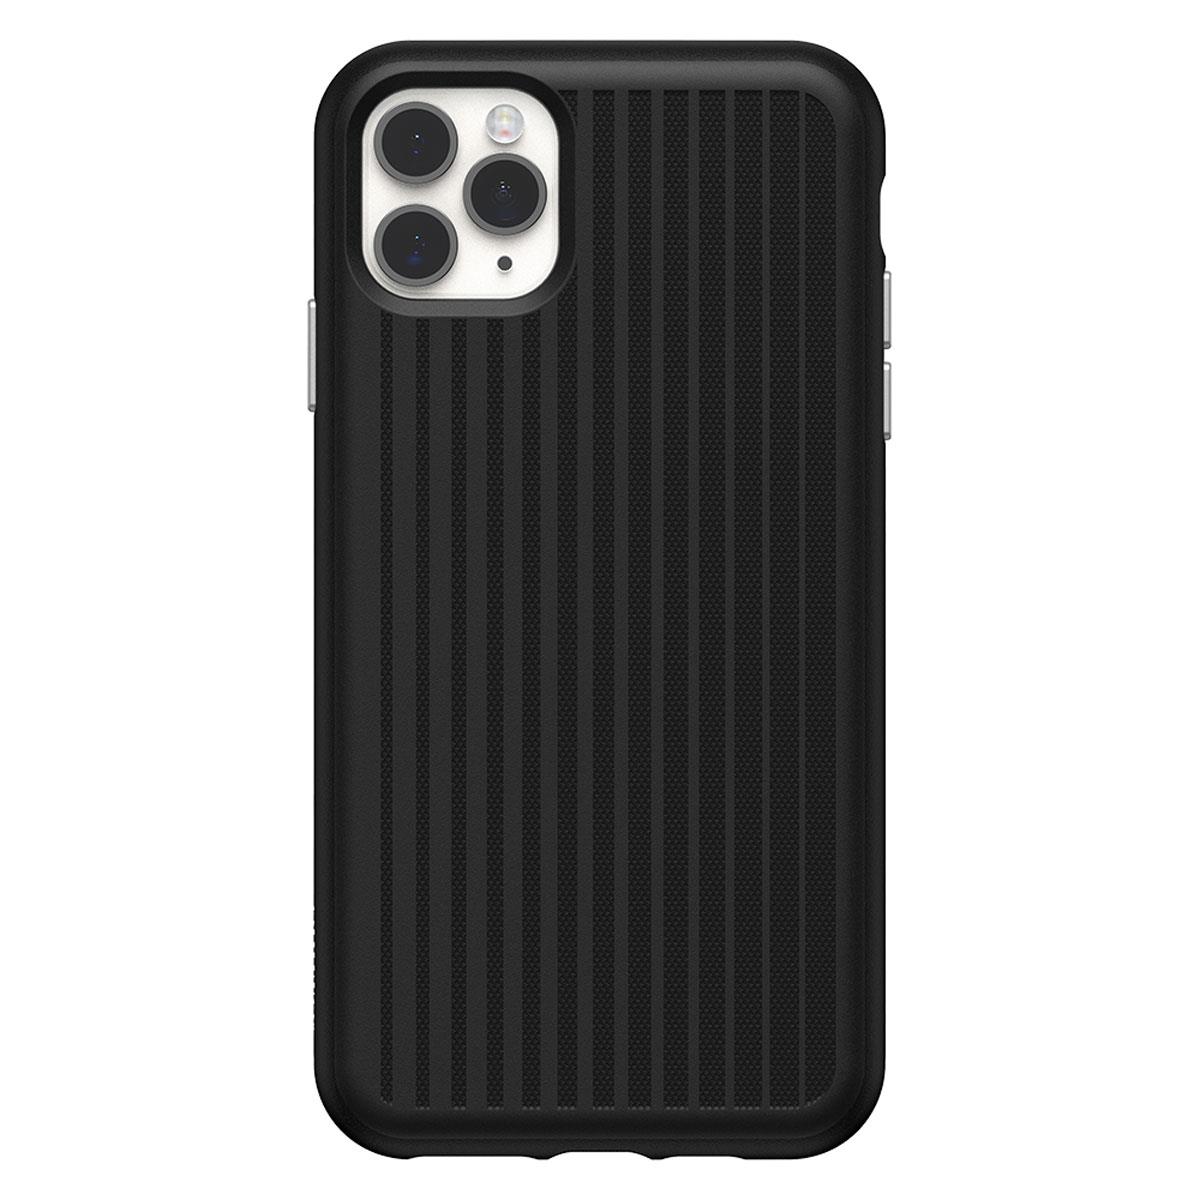 Image of OtterBox Antimicrobial Easy Grip Gaming Case for iPhone 11 Pro Max/Xs Max